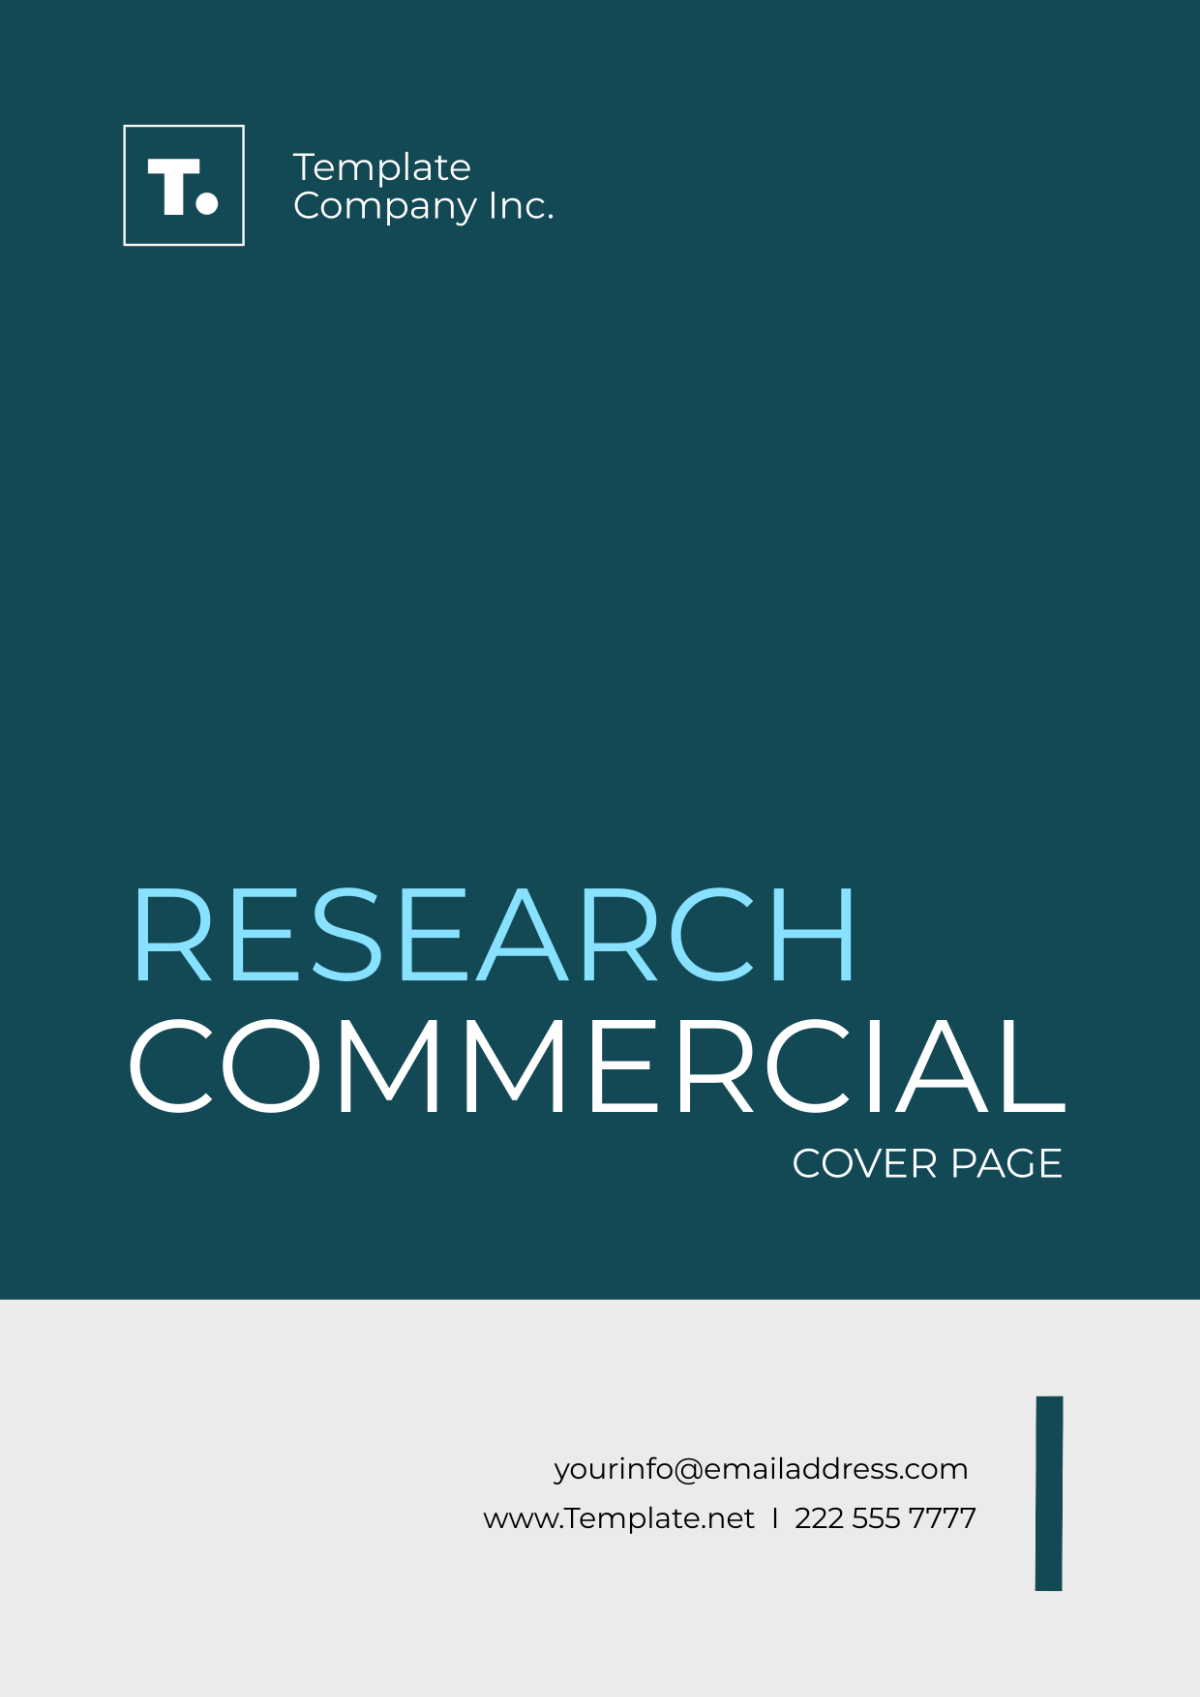 Research Commercial Cover Page Template